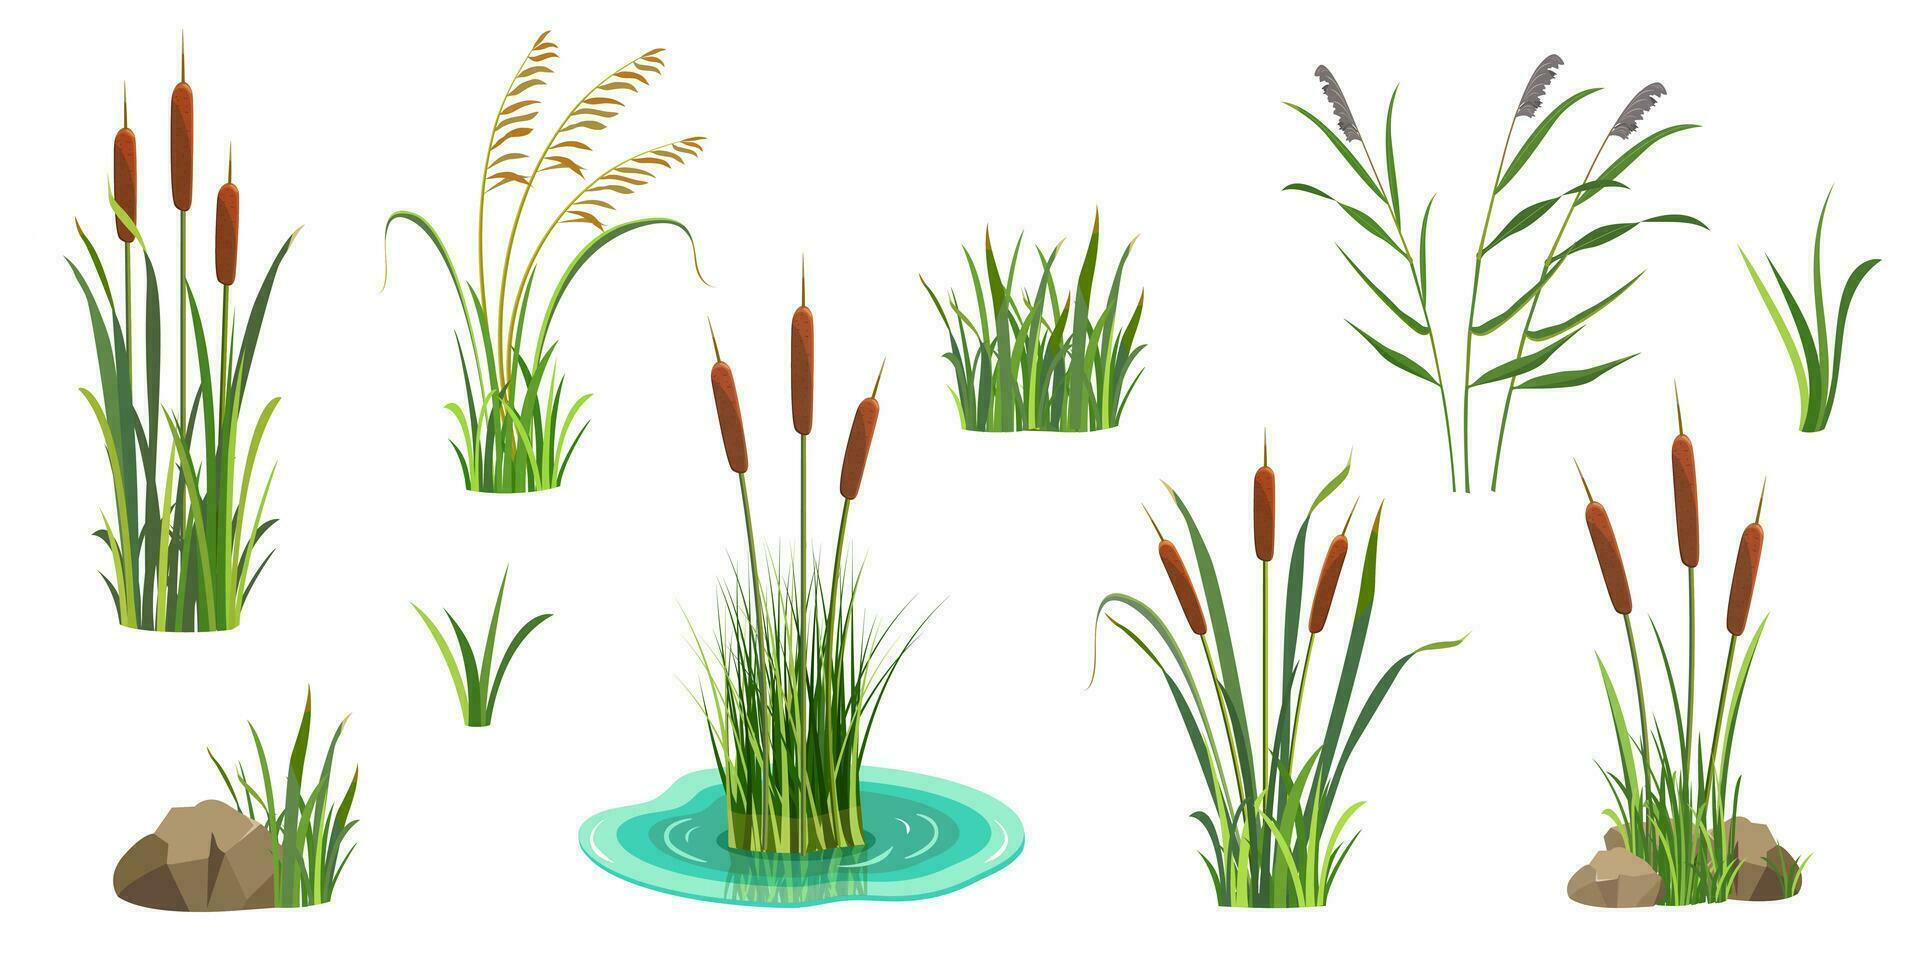 Reeds on white. Set of elements of tall marsh grass with cattail. Vector illustration of lake vegetation. River thickets.